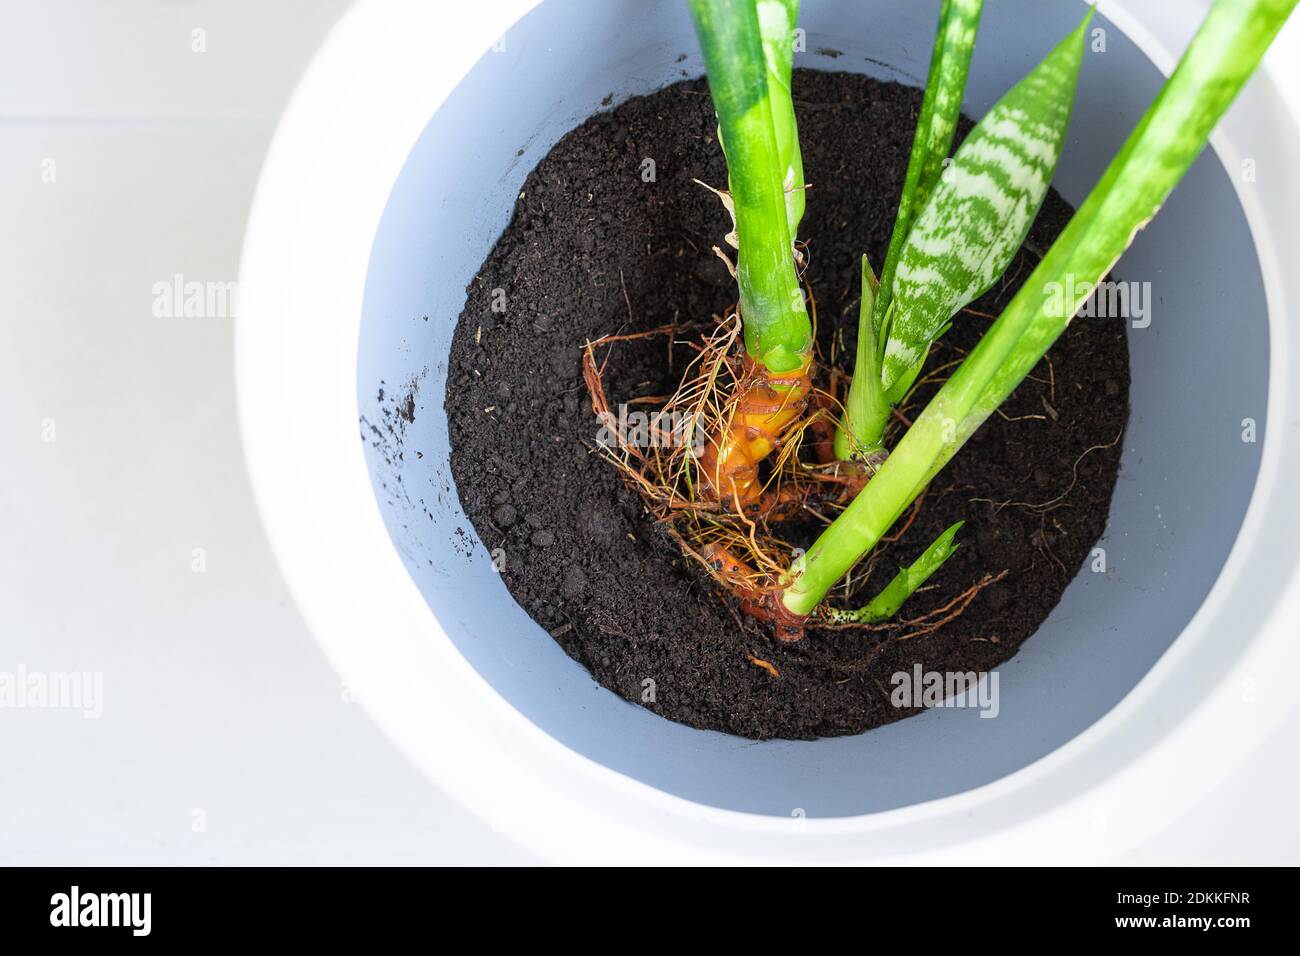 High Angle View Of Potted Plant Stock Photo